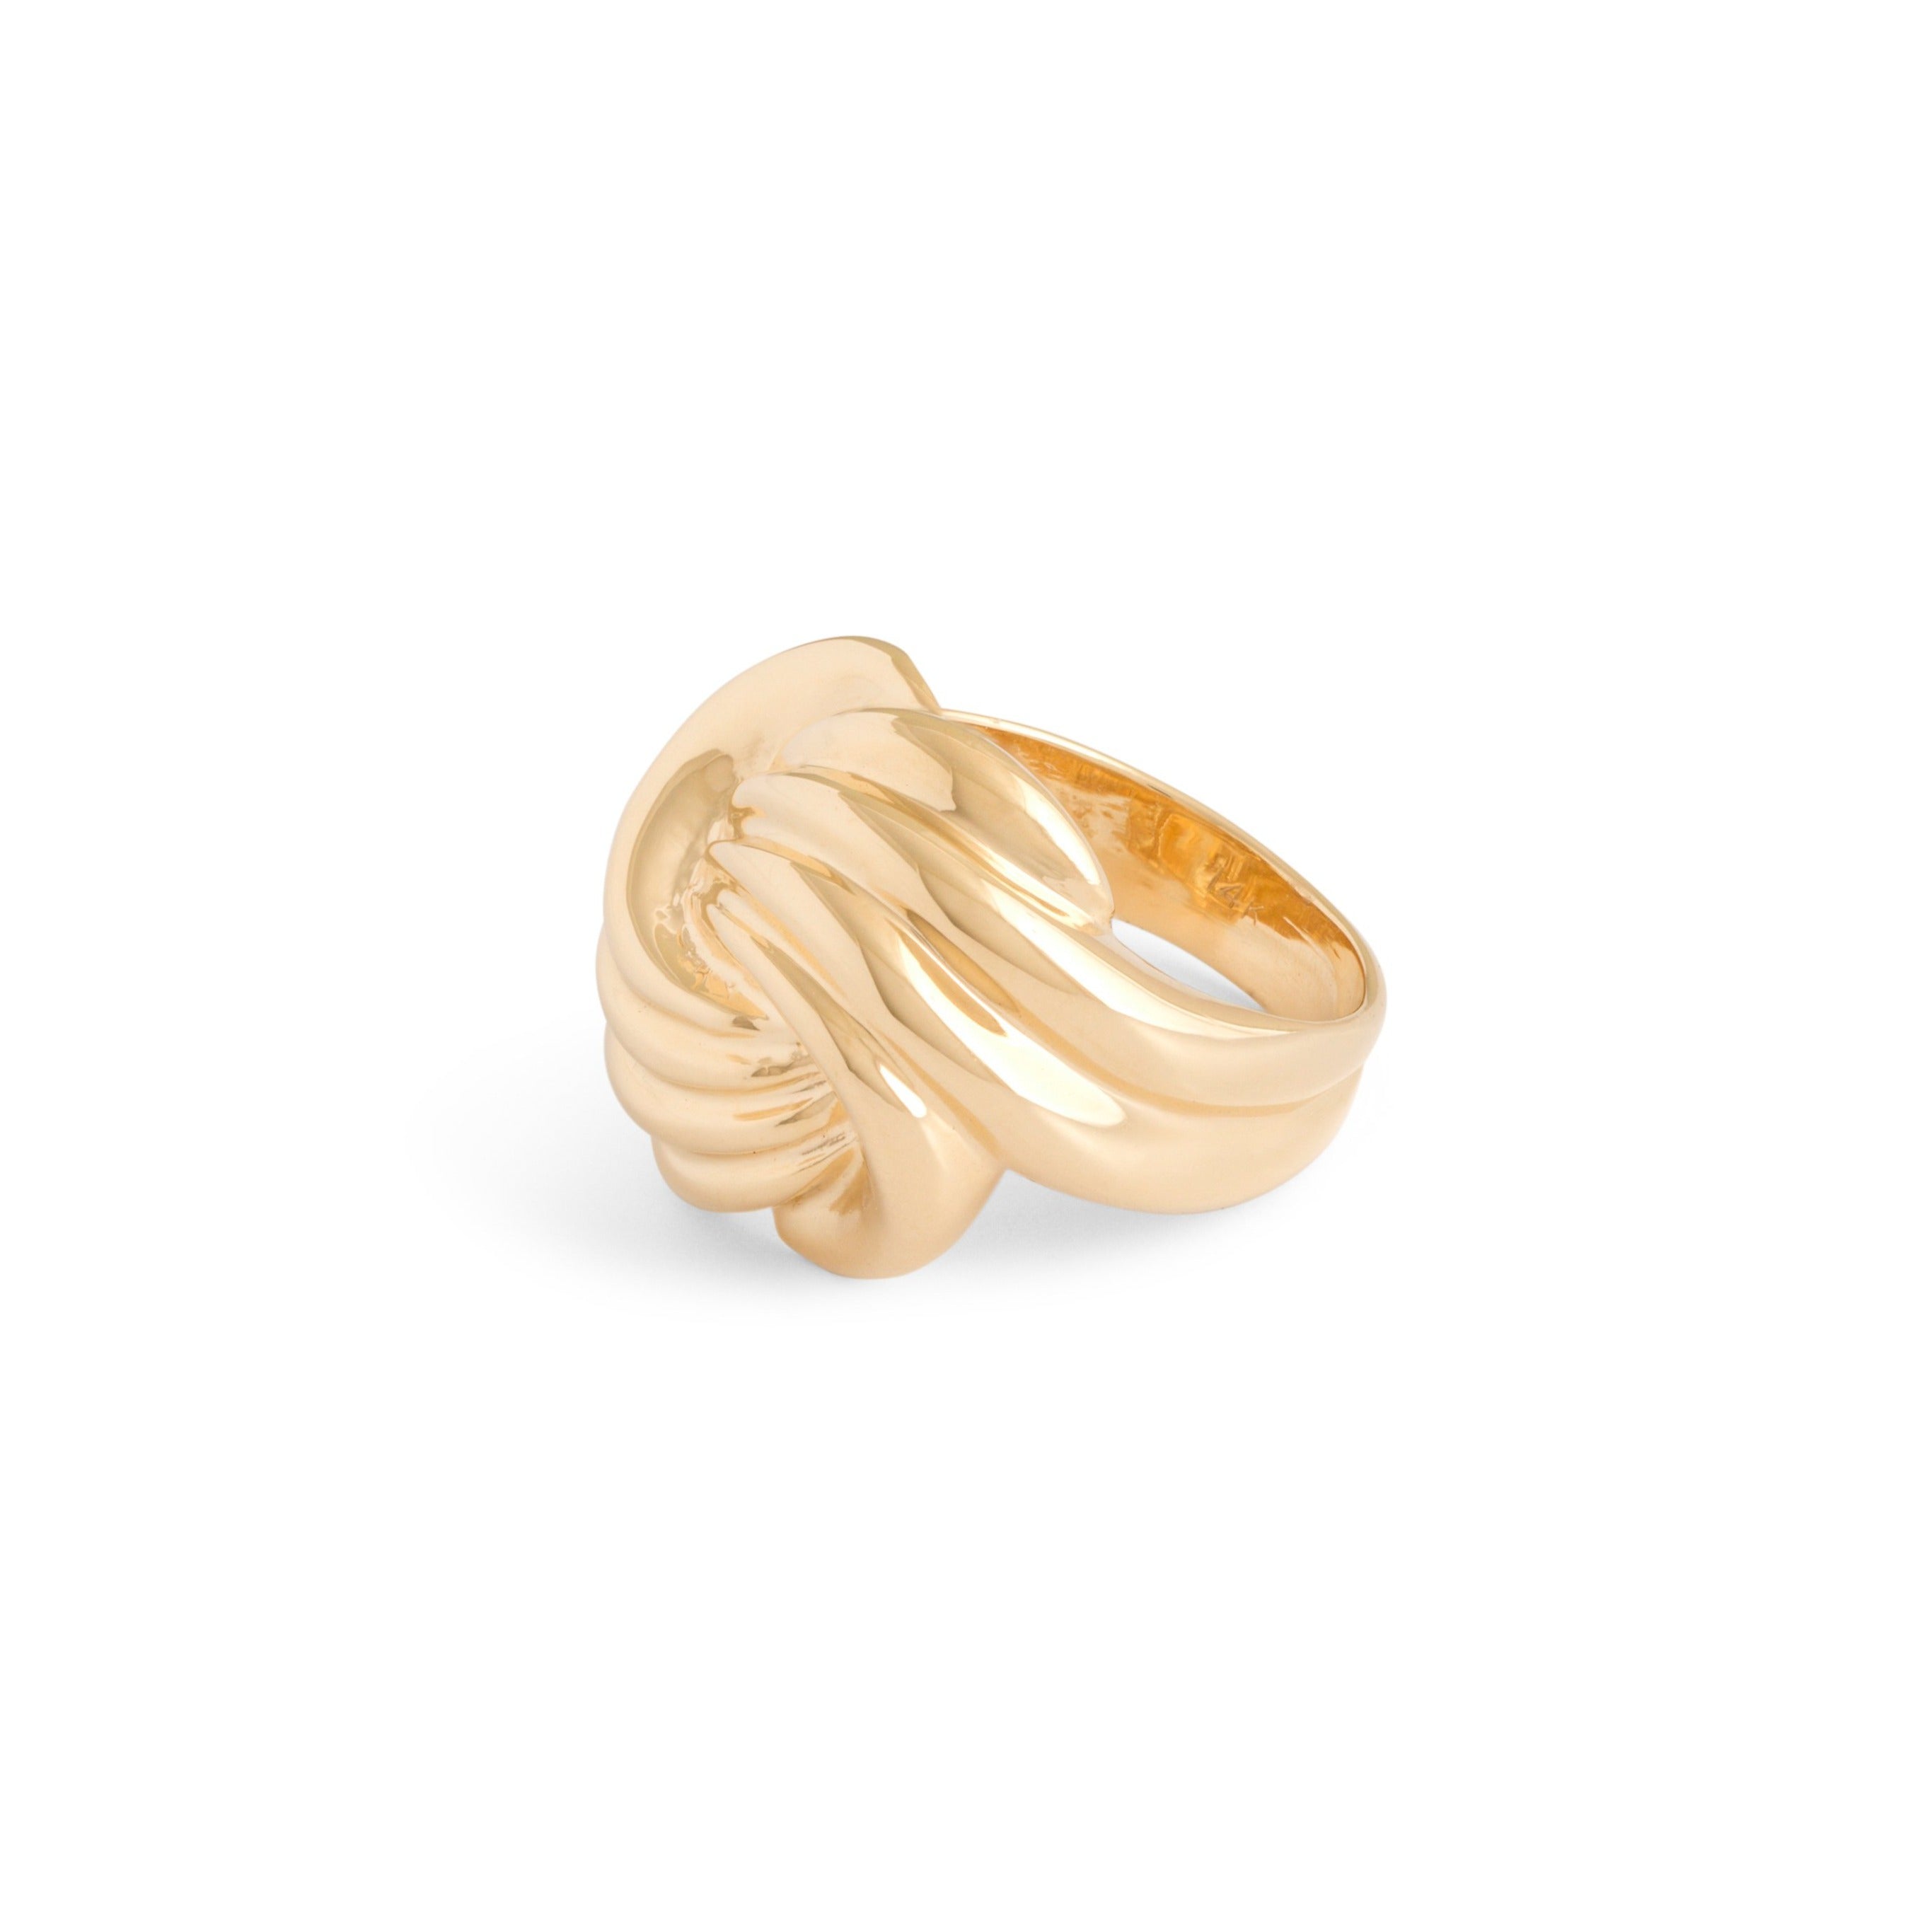 Abstract Swirl 14k Gold Dome Ring